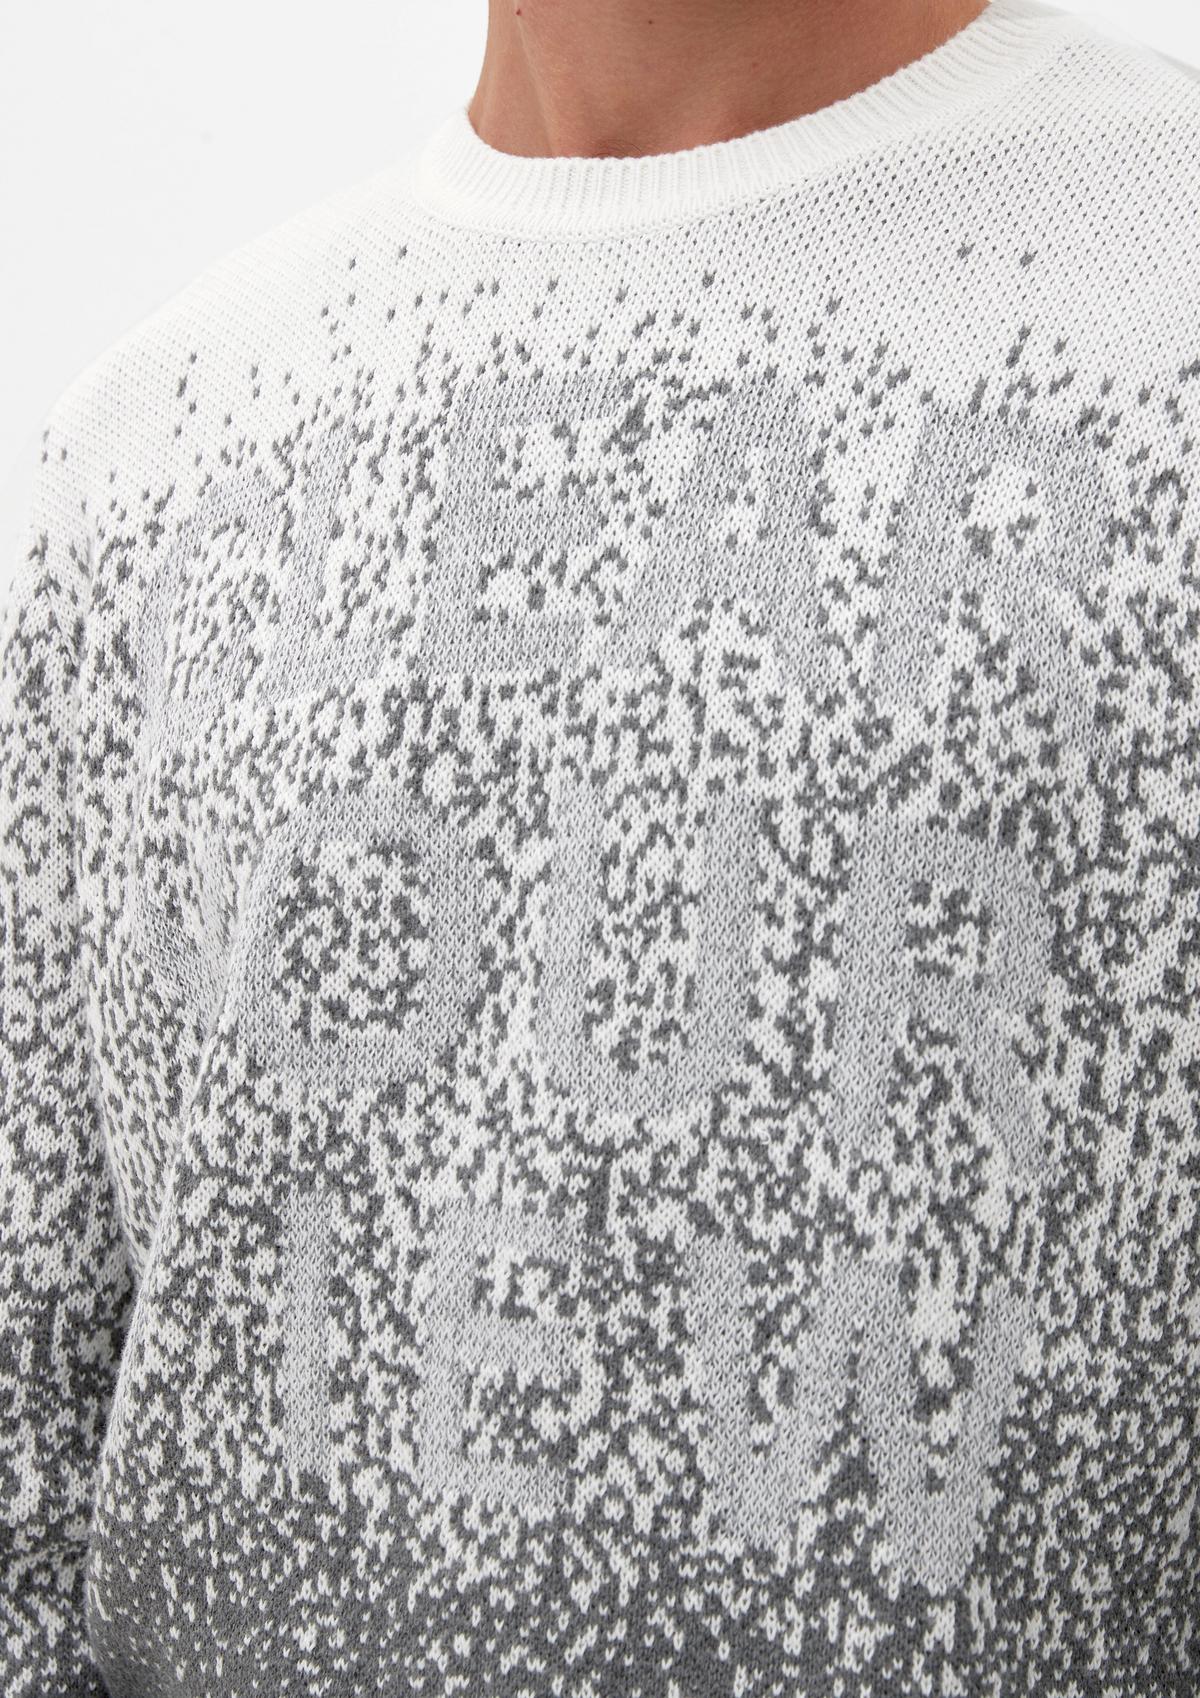 s.Oliver Knit jumper with an all-over pattern